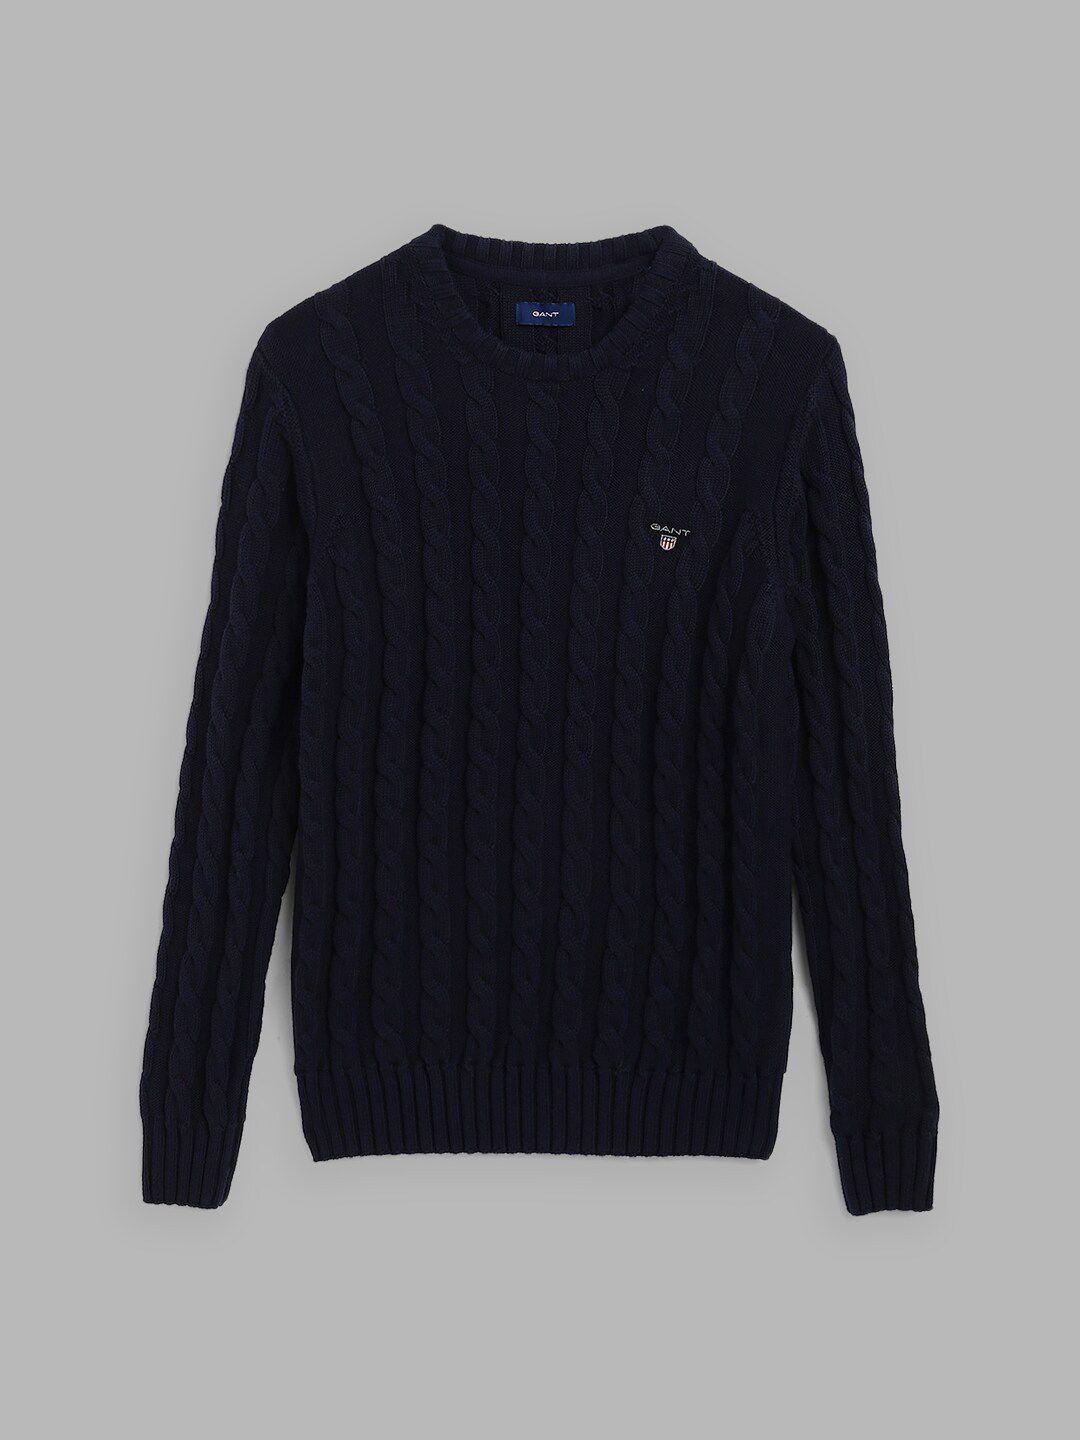 gant boys navy blue cable knit pullover sweater